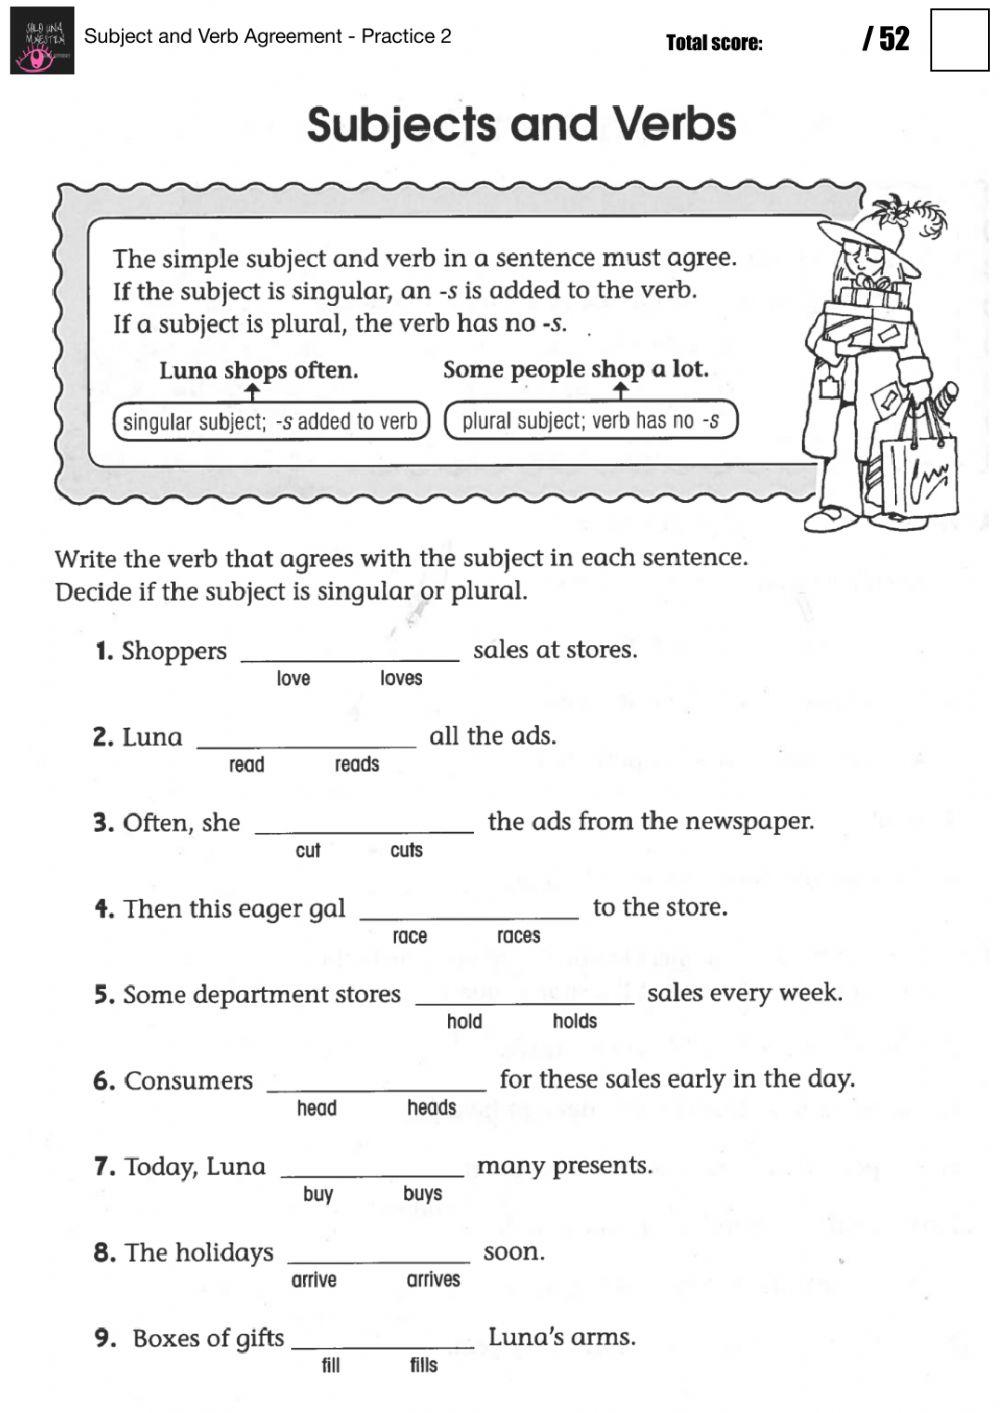 Subject and Verb Agreement - Practice 2